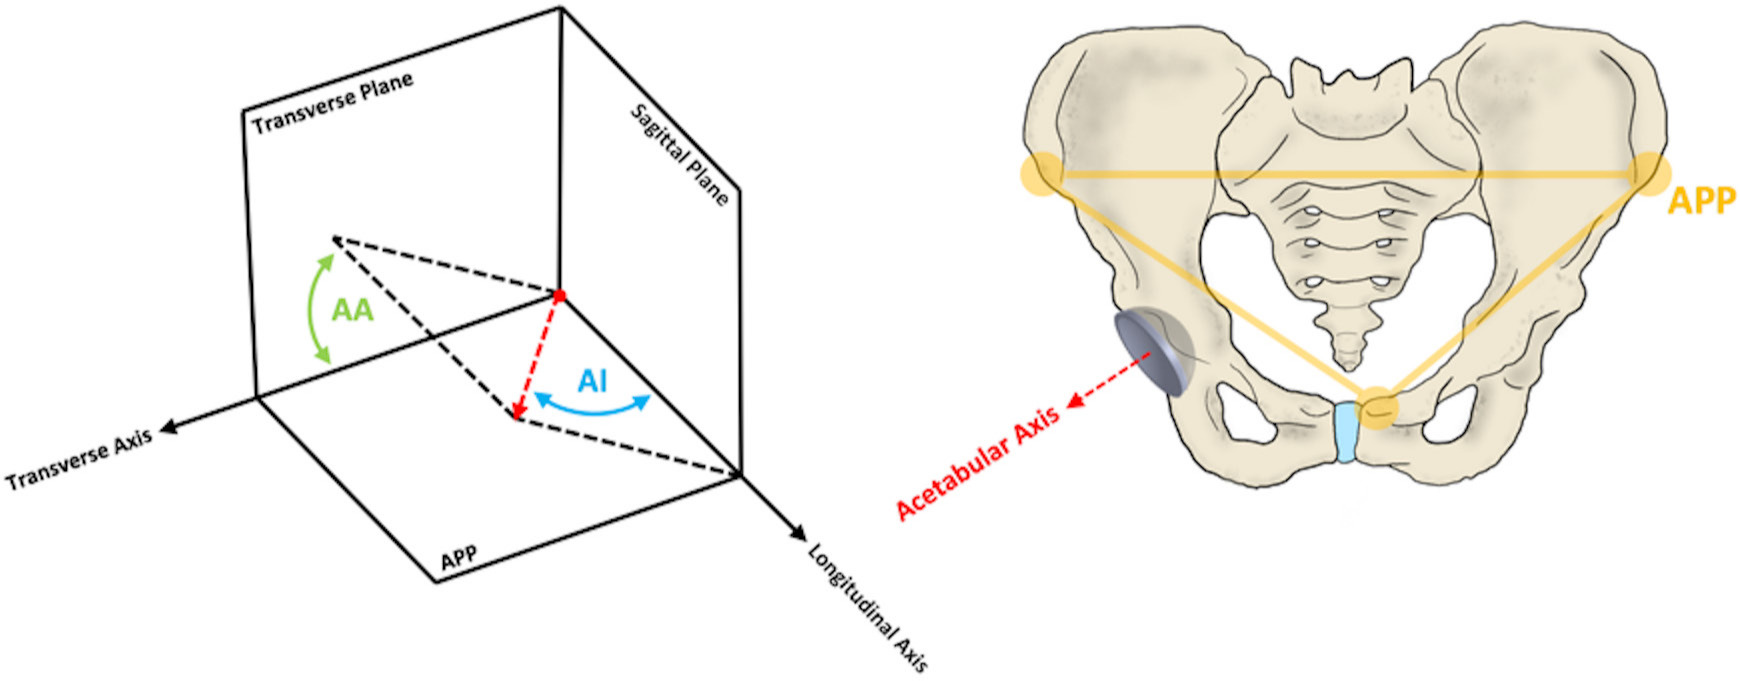 Fig. 2 
            A schematic diagram demonstrating the definition of the anterior pelvic plane (APP) and the measurement of anatomical acetabular cup inclination (AI) and anteversion (AA). The APP forms the coronal plane, from which the sagittal and transverse planes can be defined. The acetabular axis intersects the centre of the cup and is perpendicular to the cup rim plane.
          